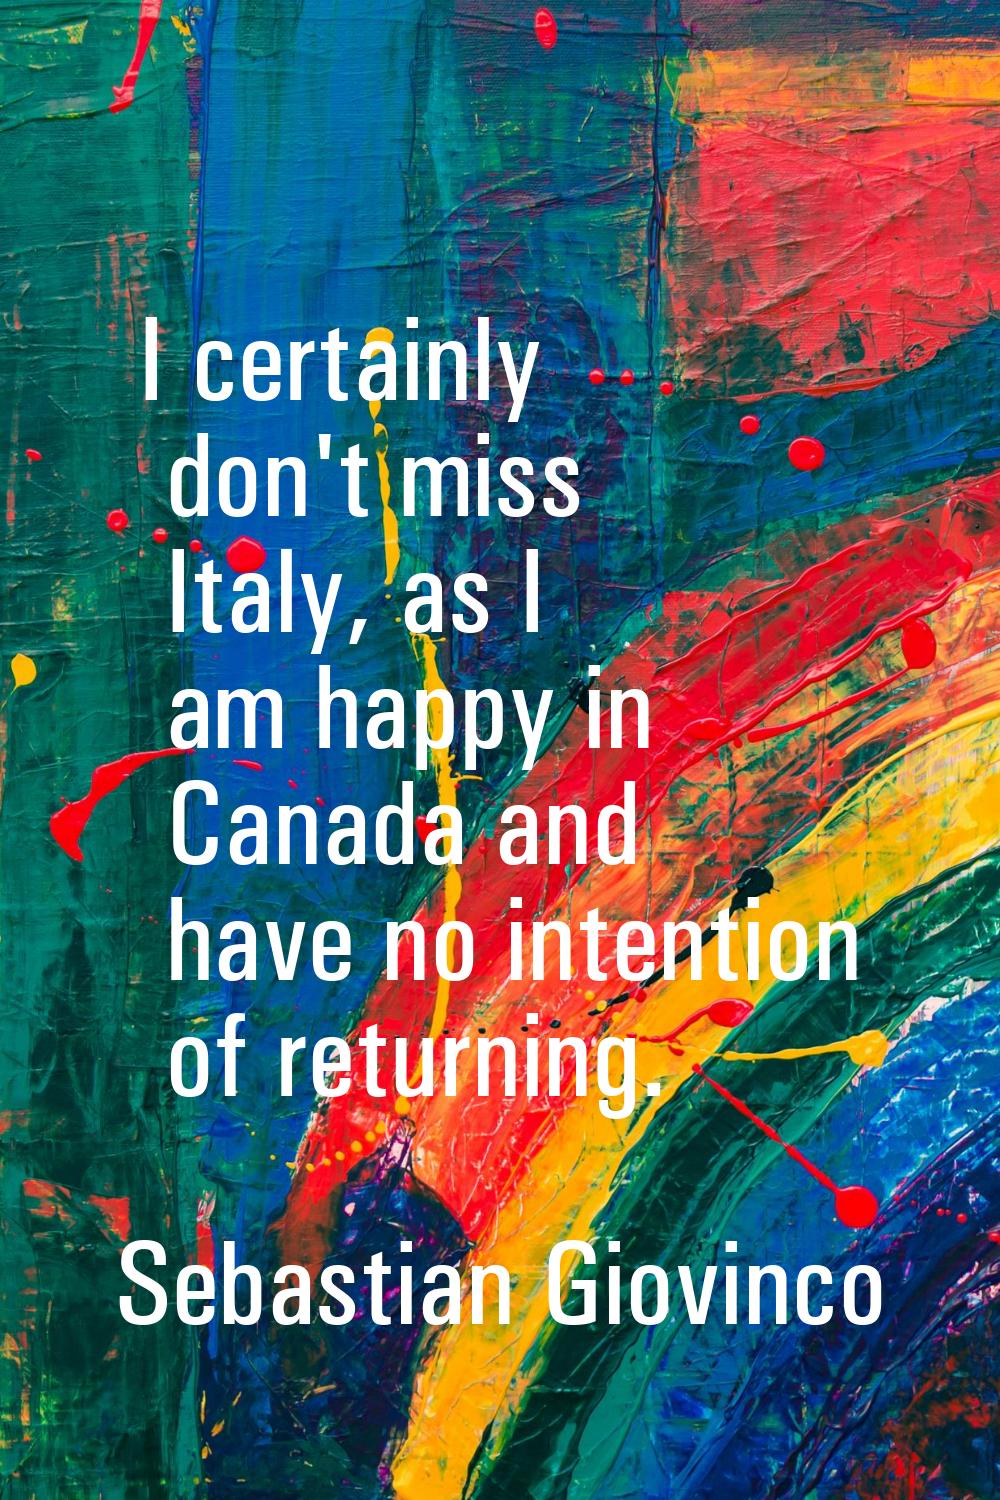 I certainly don't miss Italy, as I am happy in Canada and have no intention of returning.